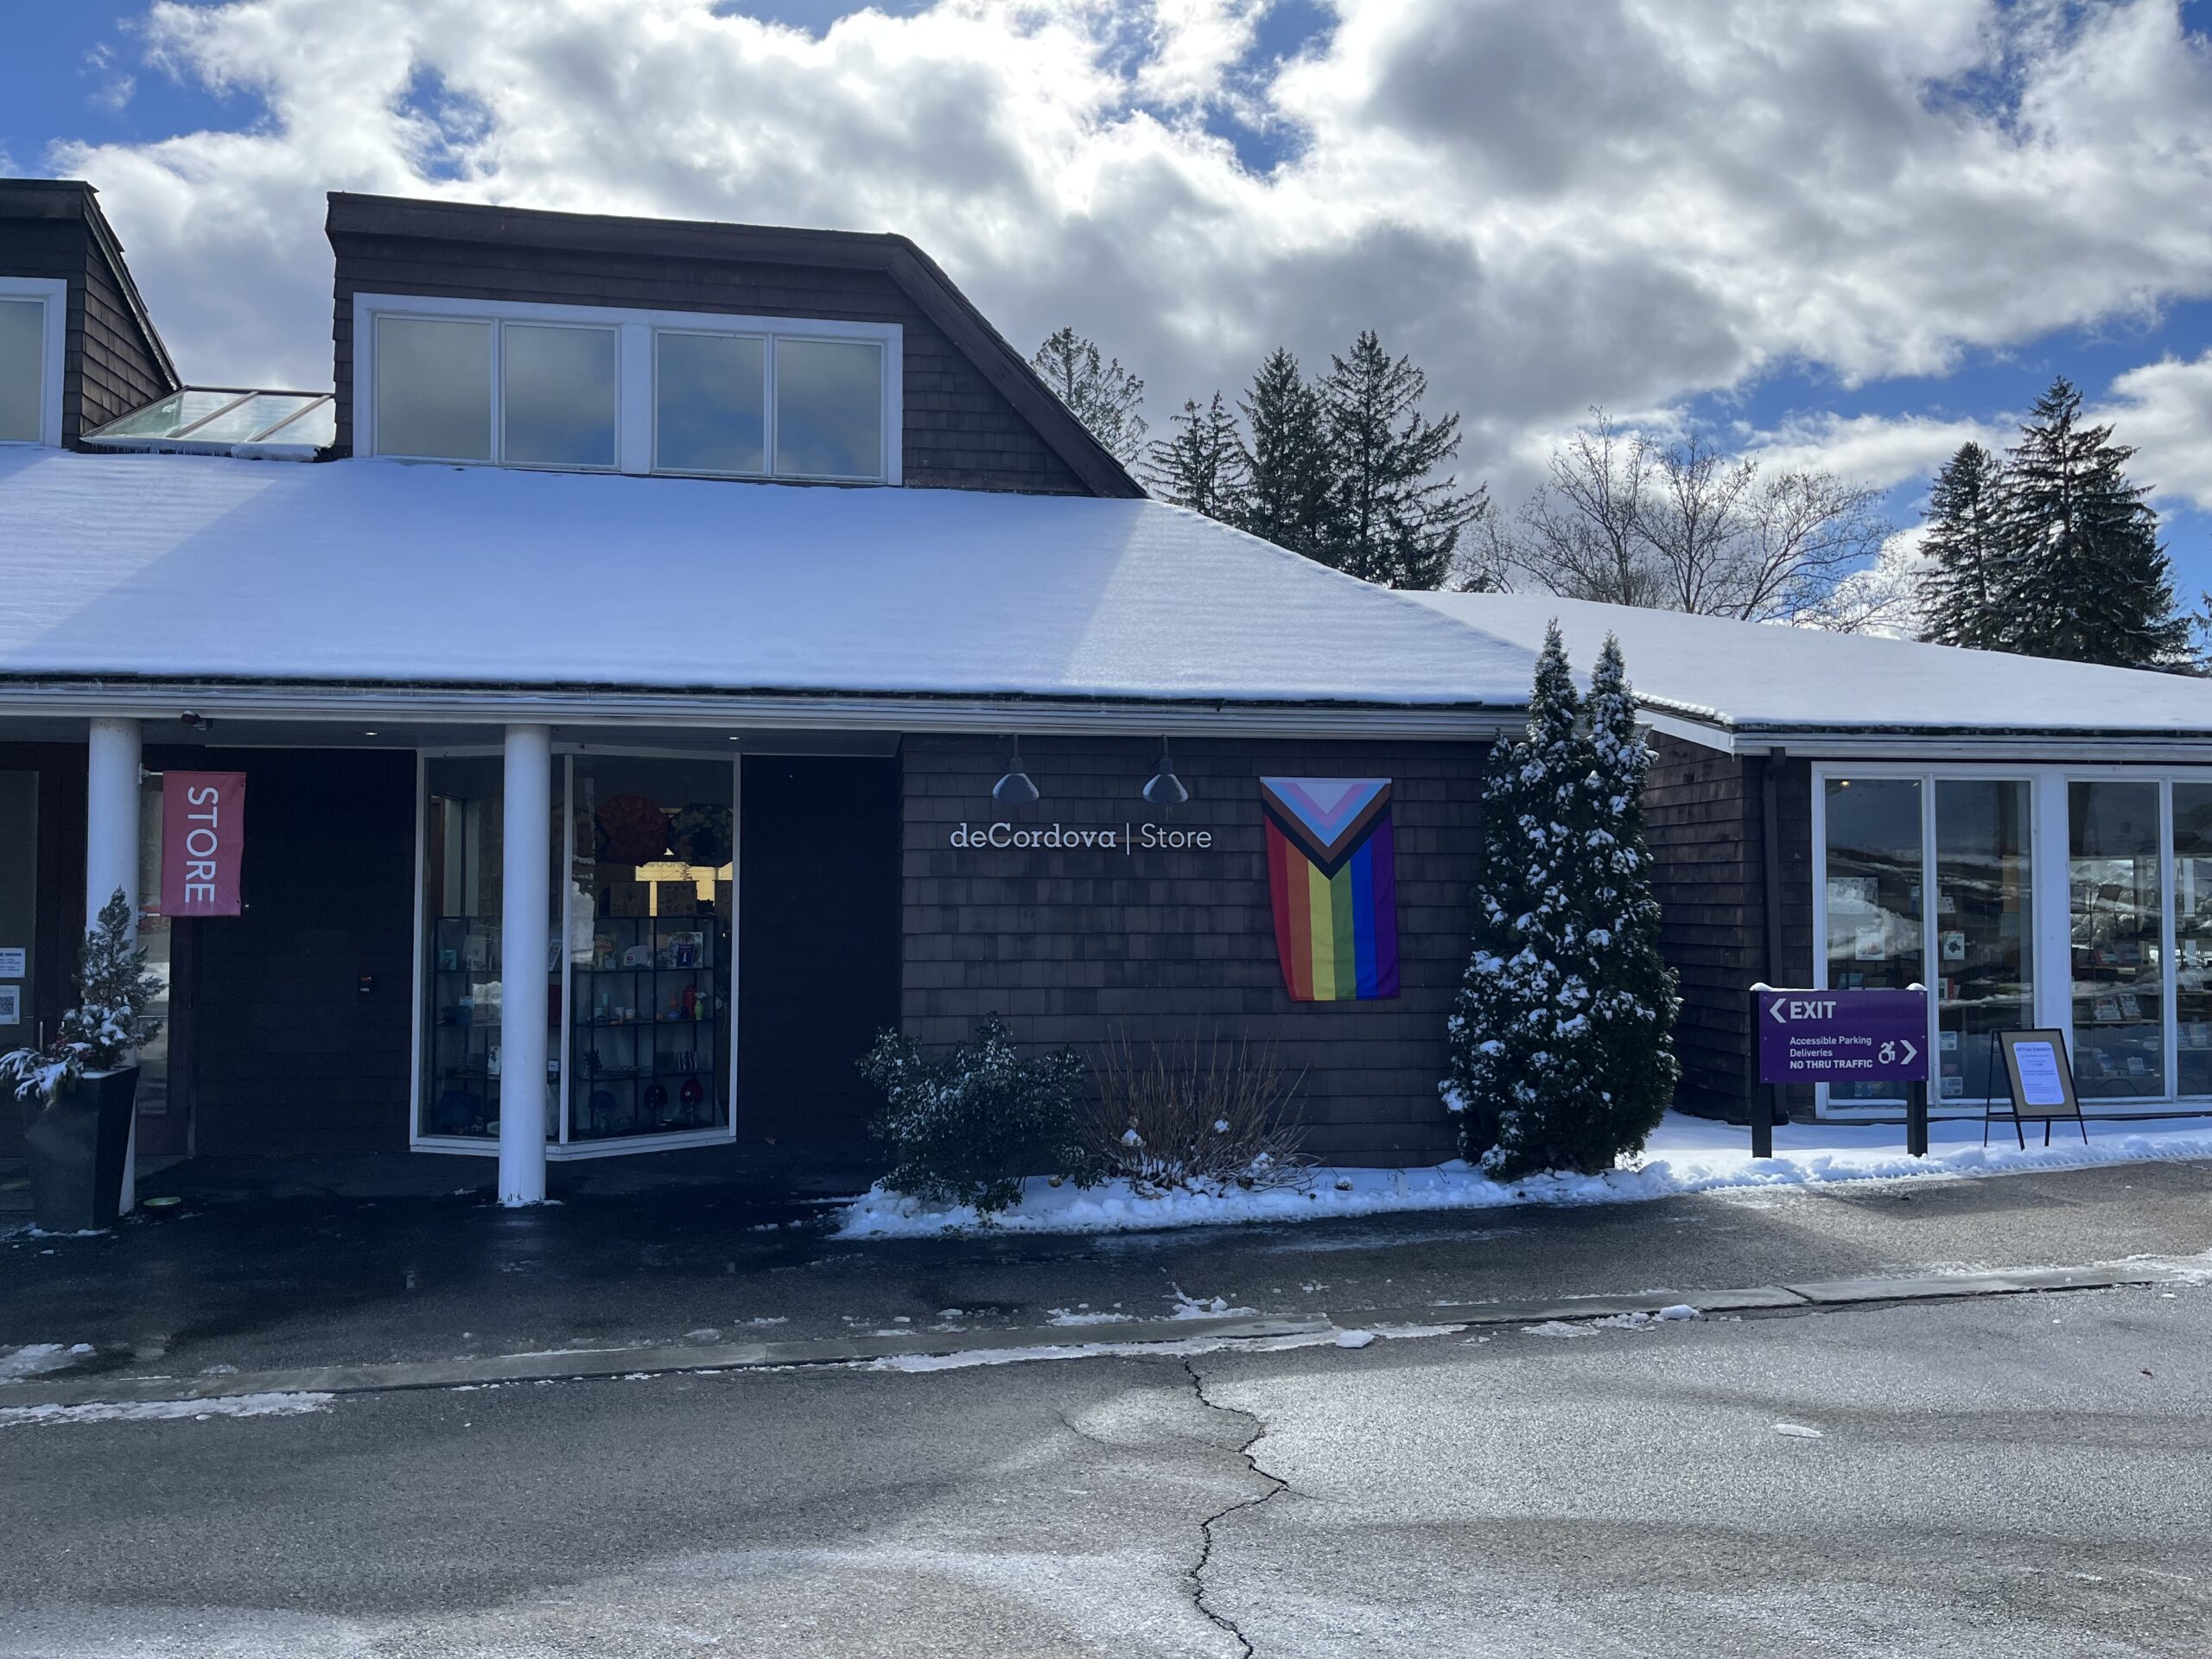 the exterior of the deCordova store, covered in snow